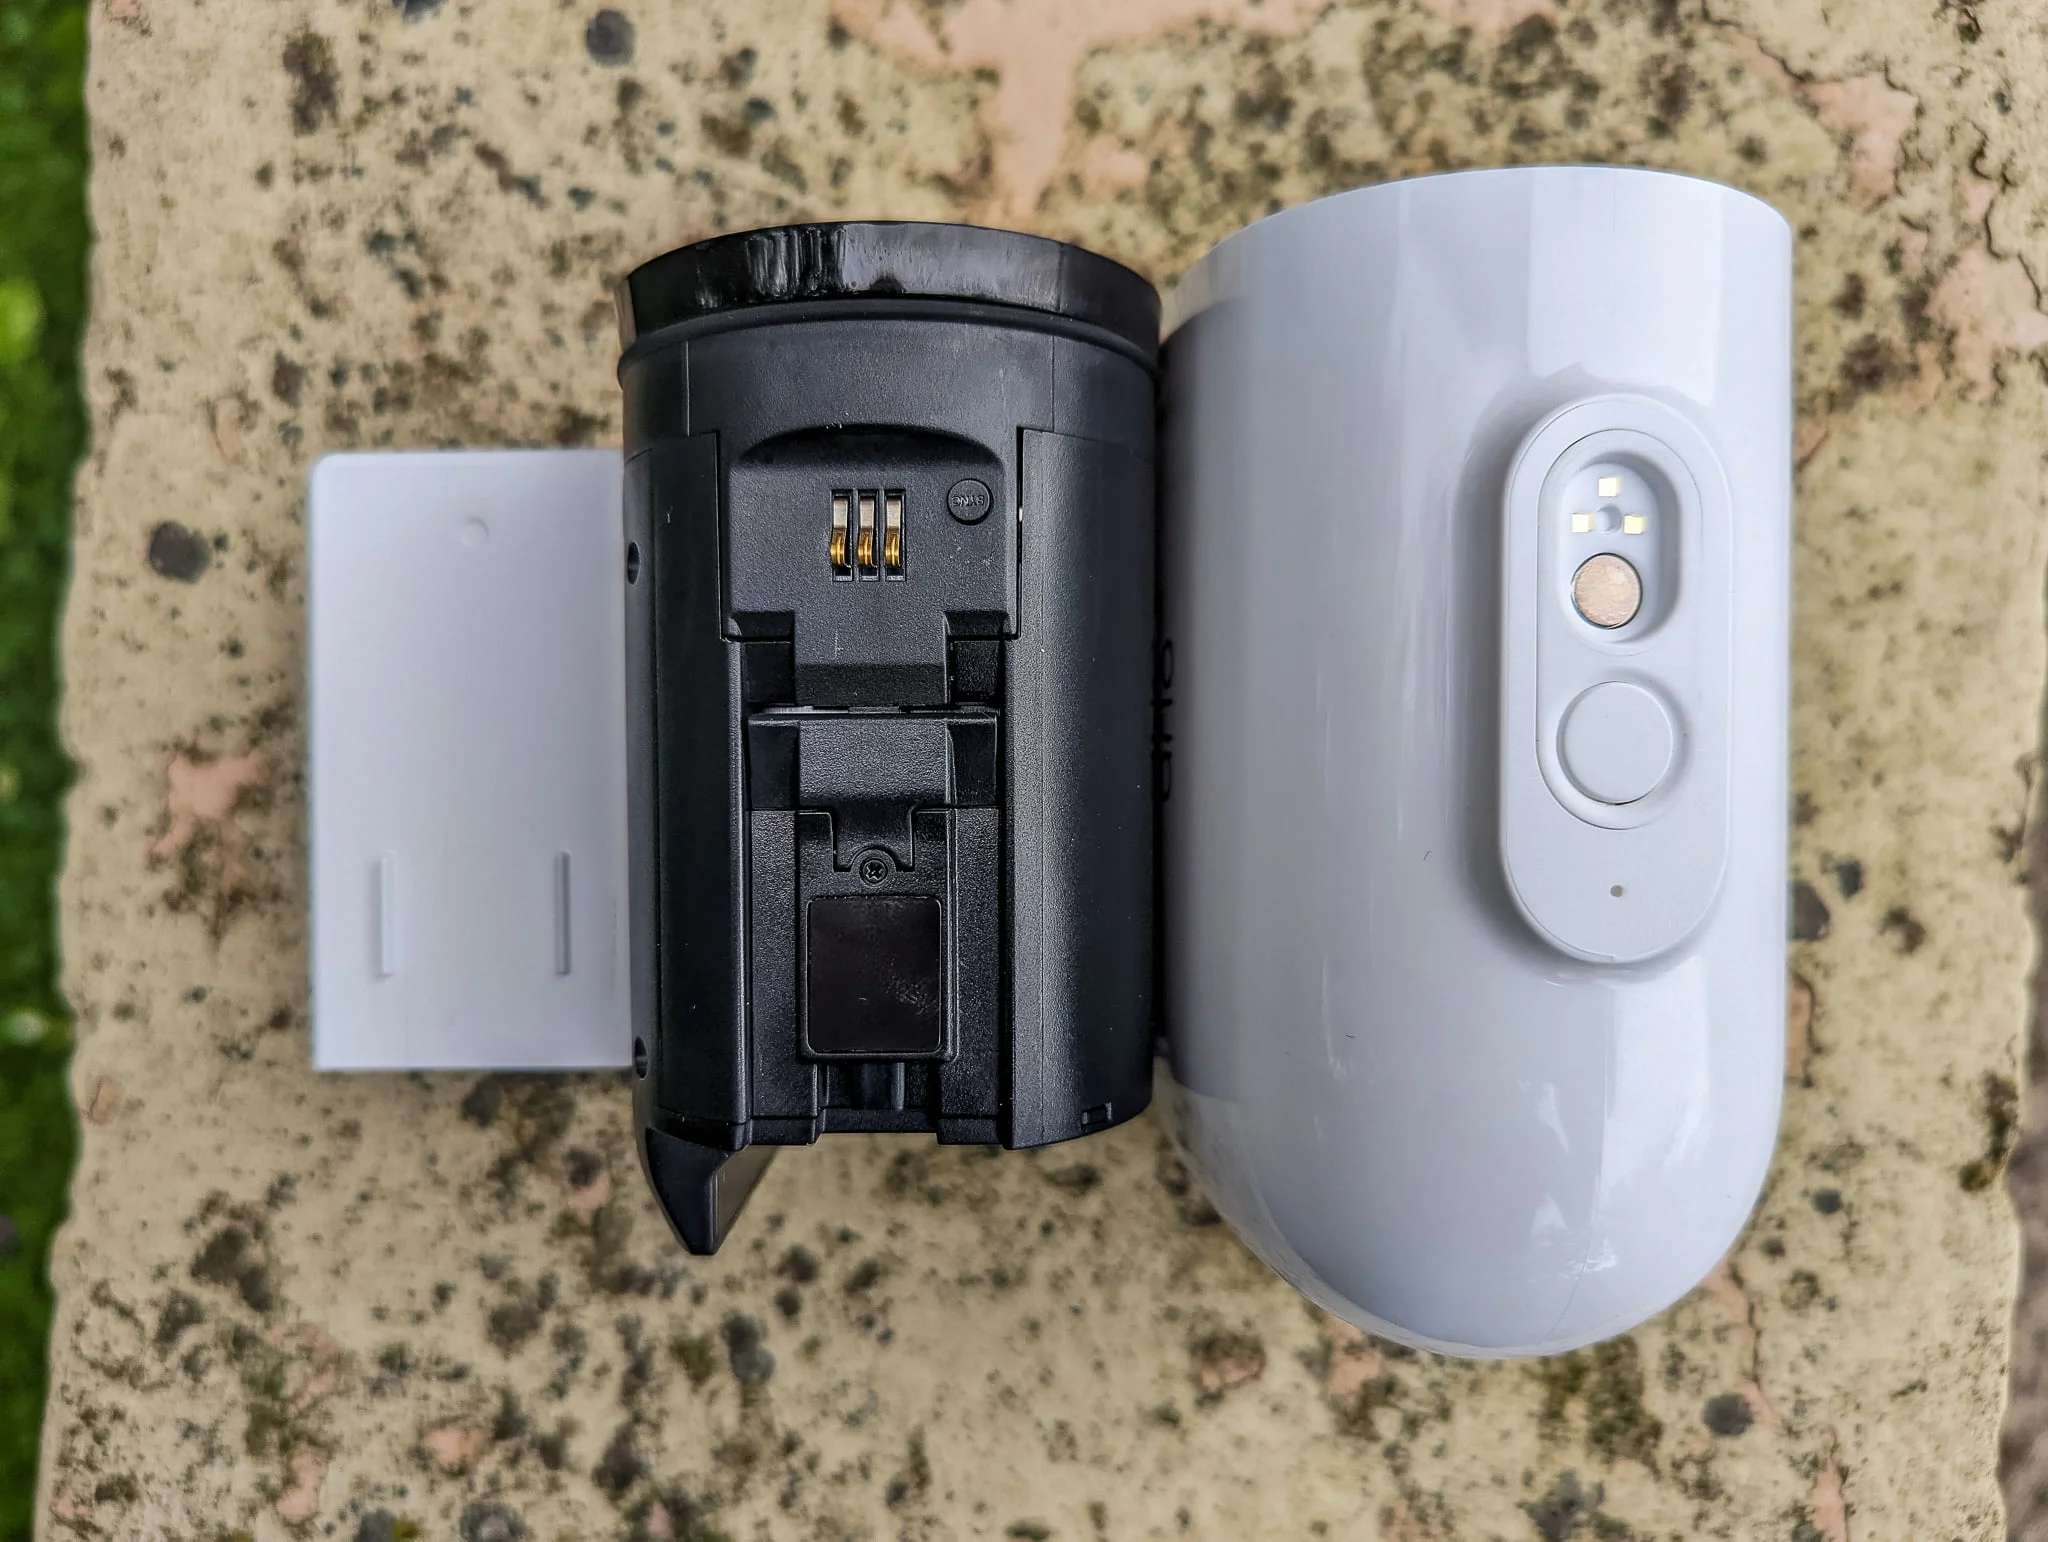 Arlo Go 2 Review3 - Arlo Go 2 4G Security Camera Review – A well-needed upgrade to compete with Reolink Go Plus & Eufy 4G LTE Starlight